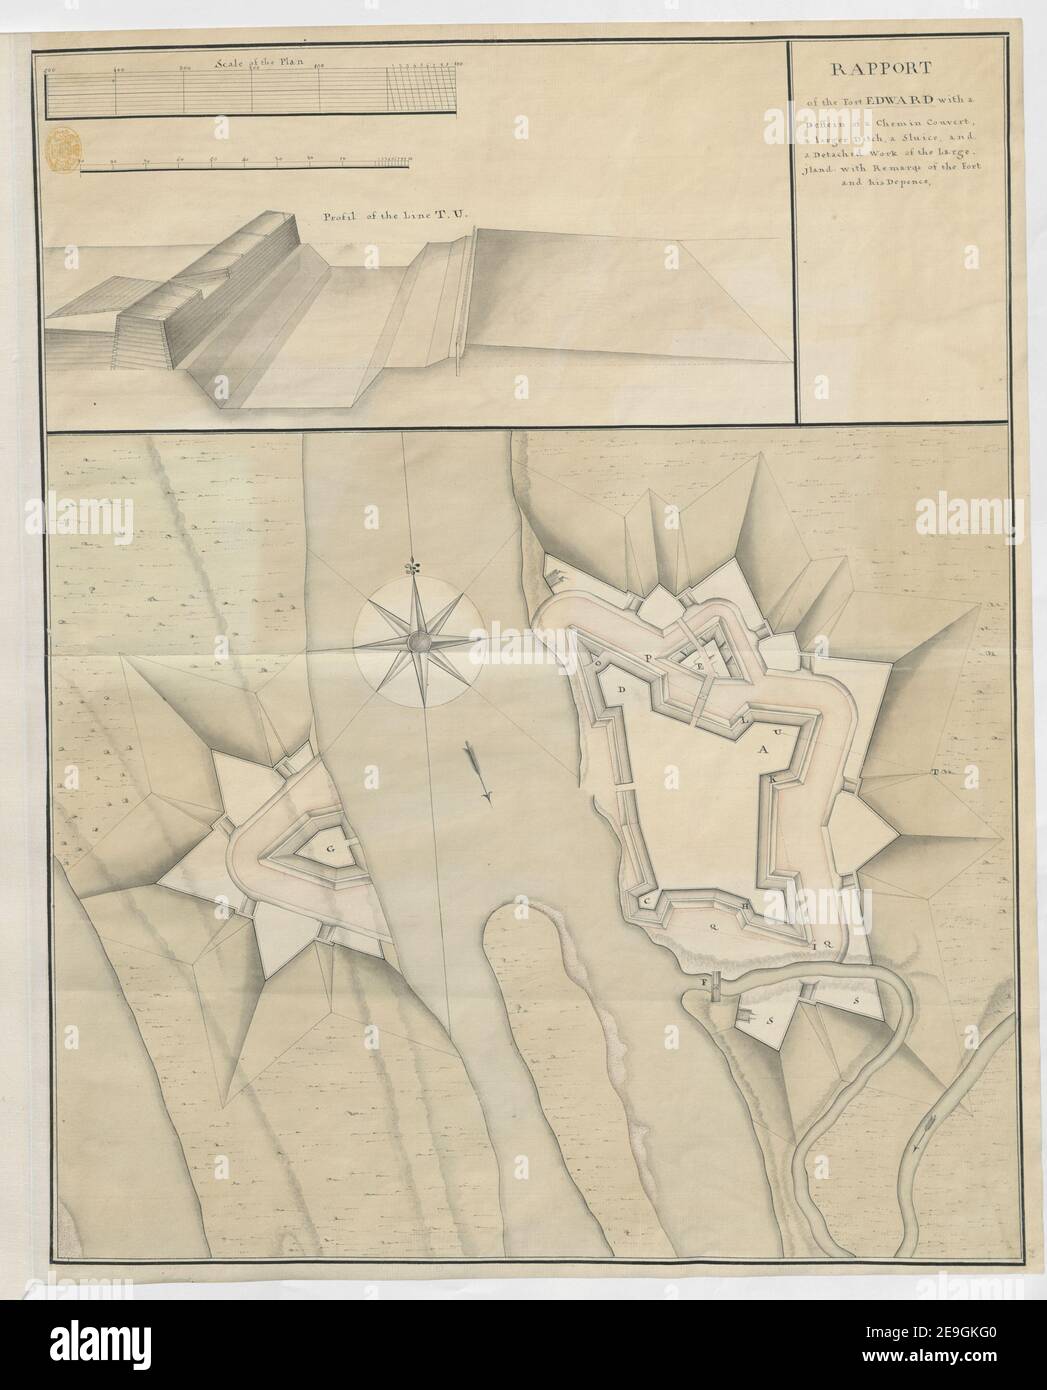 RAPPORT of the Fort EDWARD with a Dessein of a Chemin Couvert, a large Ditch, a Sluice, and a Detached work of the Large iland: with Remarqs of the fort and his Depence. Map information:  Title: RAPPORT of the Fort EDWARD with a Dessein of a Chemin Couvert, a large Ditch, a Sluice, and a Detached work of the Large iland: with Remarqs of the fort and his Depence. 121.64. Place of publication: [Fort Edward?] Publisher: [producer not identified] Date of publication: [between 1755 and 1757.]  Item type: 1 map Medium: manuscript pen and ink with watercolour Dim Stock Photo